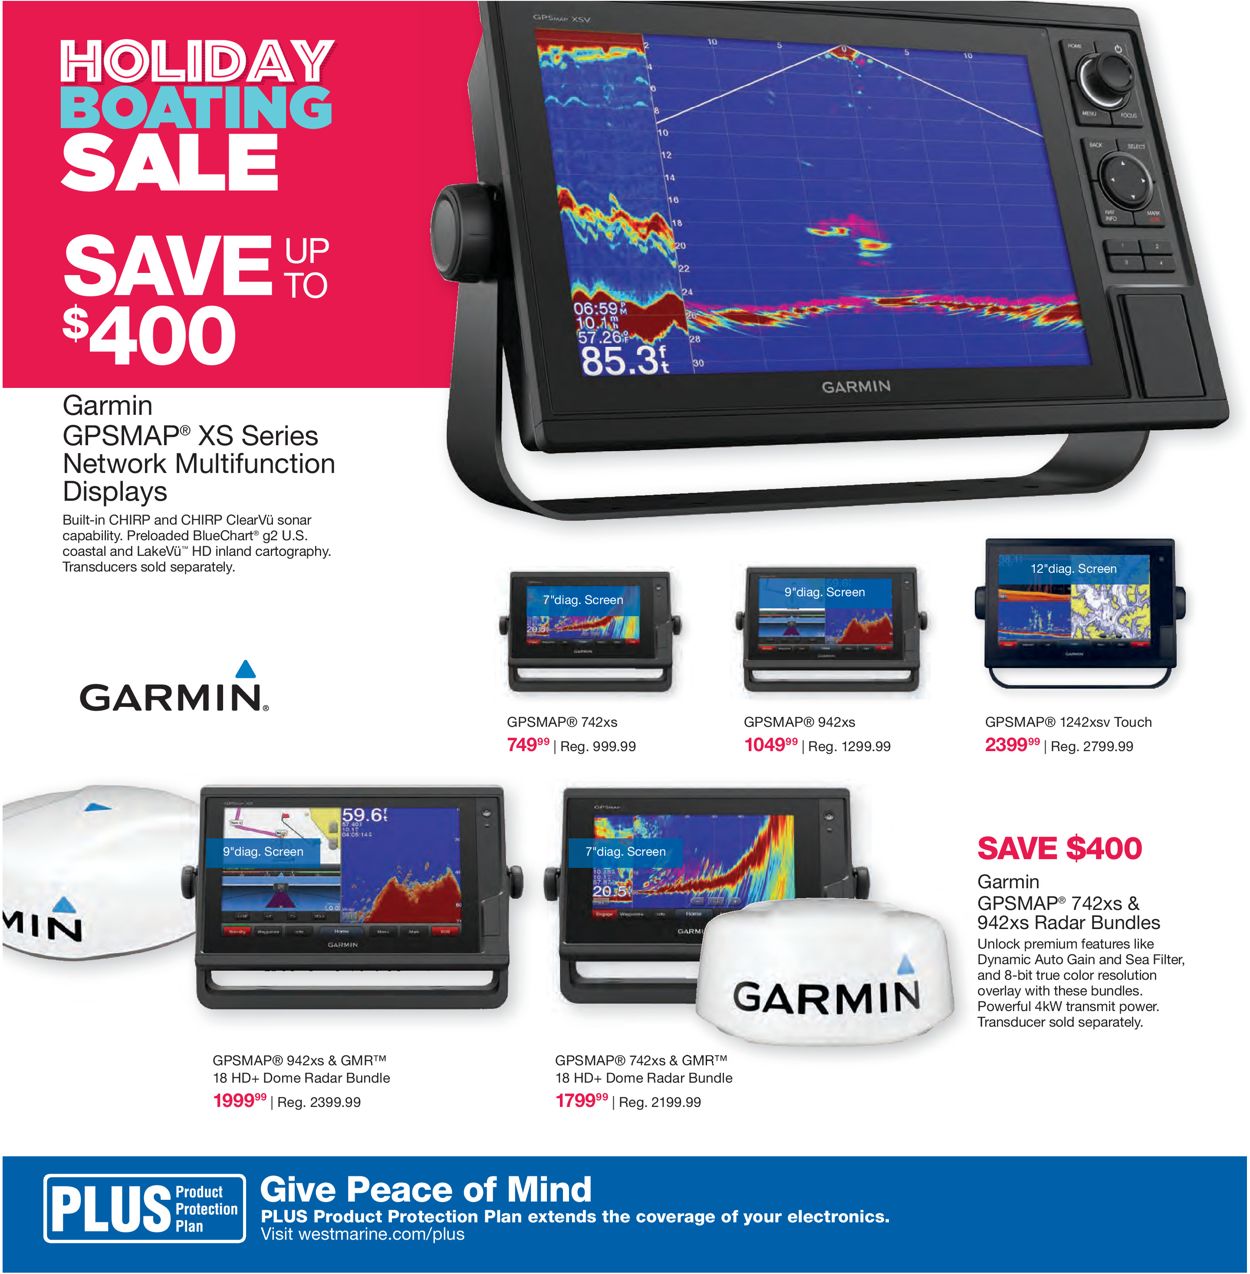 Catalogue West Marine - Holiday Ad 2019 from 11/14/2019